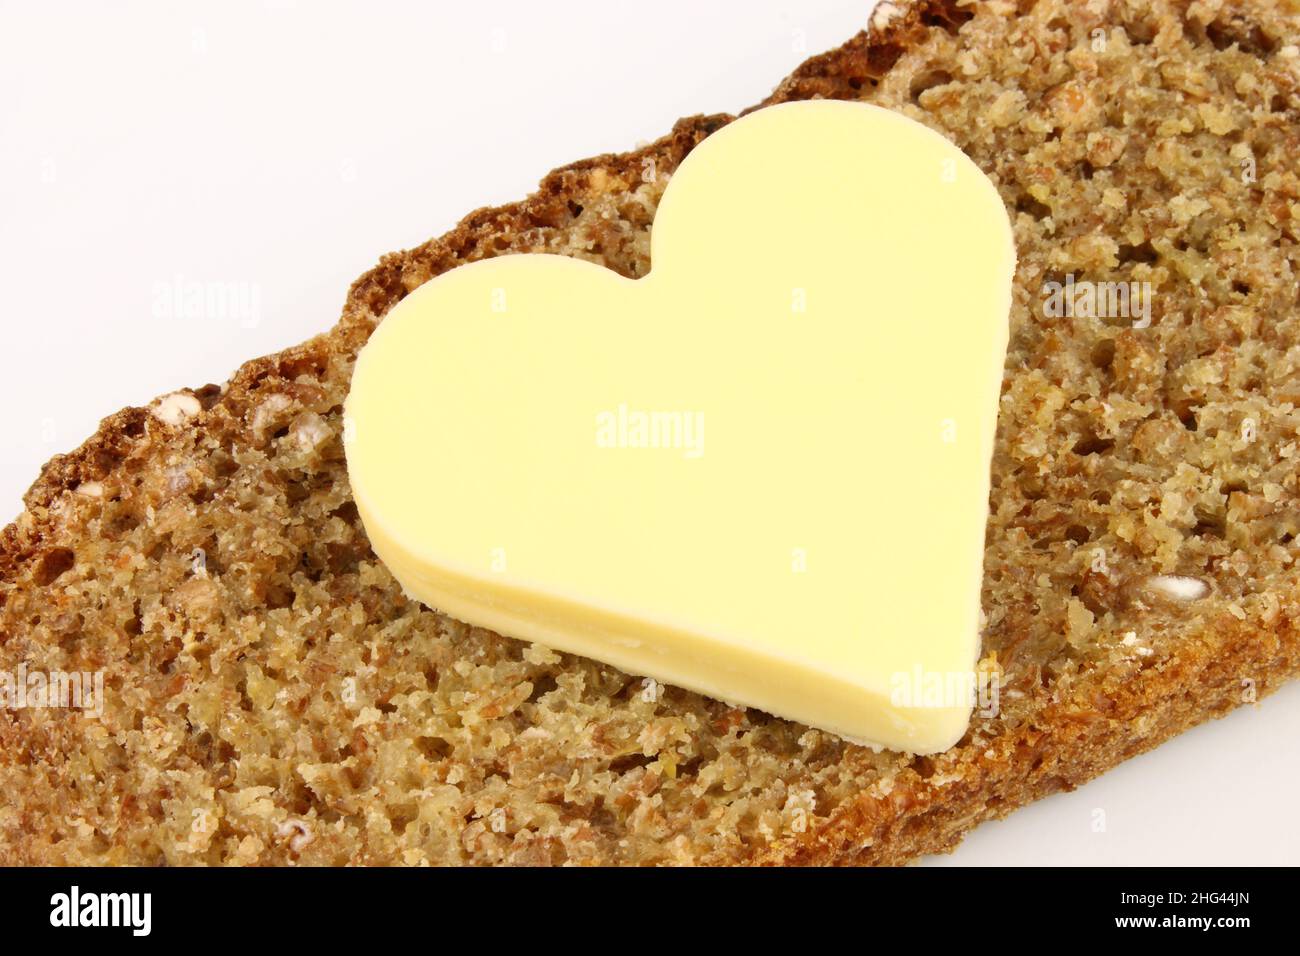 A slice of whole wheat bread with heart shaped butter. Stock Photo